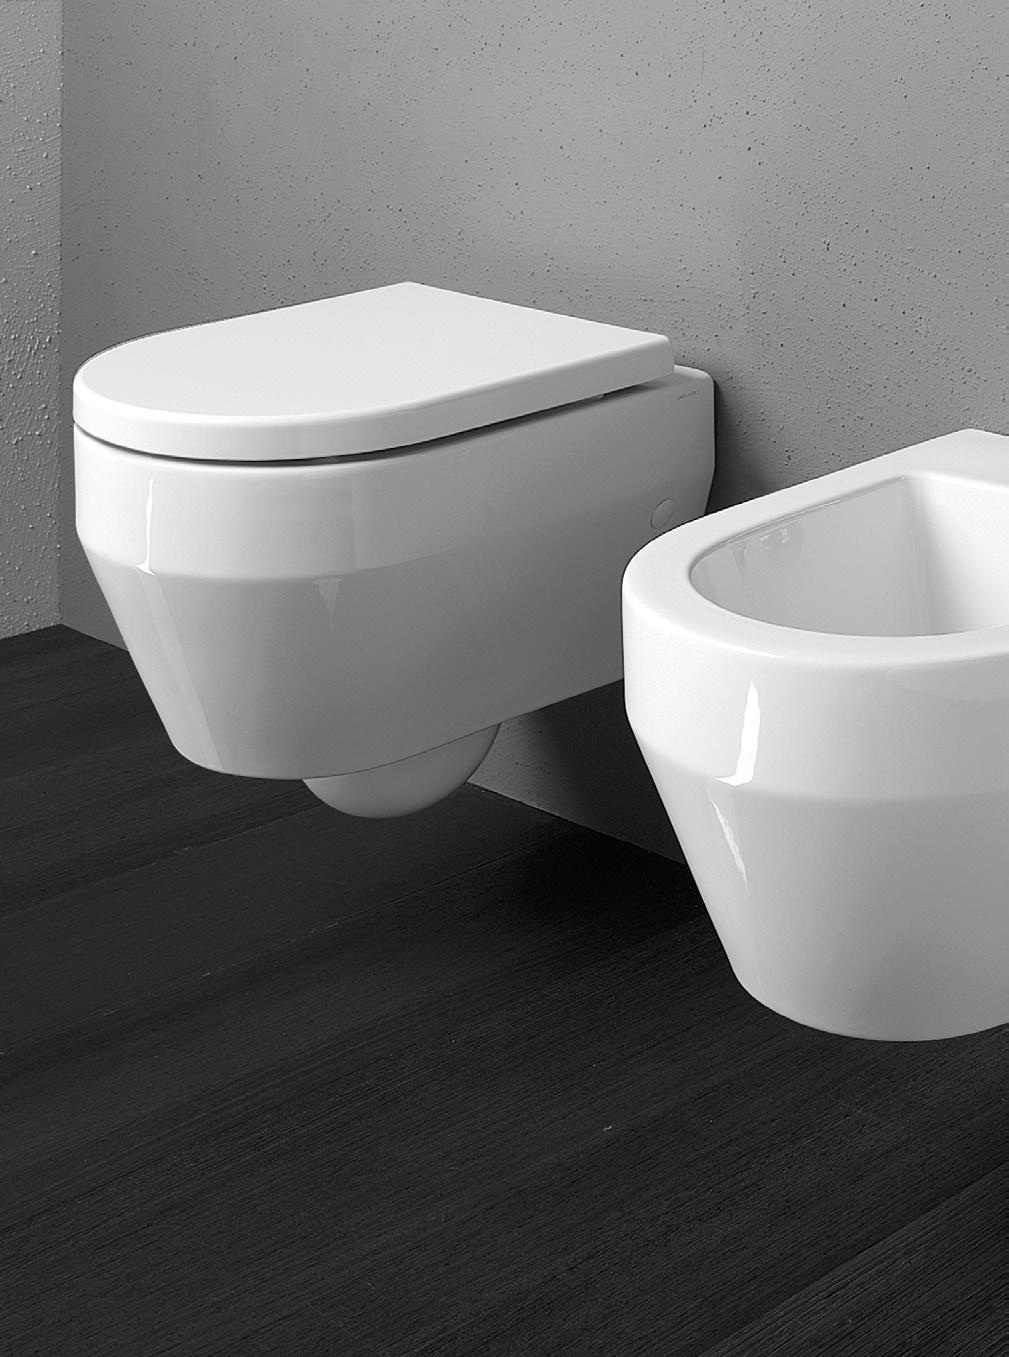 COMPLETE WALL HUNG MELBOURNE 173-177 Barkly Avenue Burnley VIC 3121 P 03 9429 8888 F 03 9429 6966 500 ZERO 50 WALL HUNG BIDET 219 White Ceramic 32mm pop up waste required Single taphole only SYDNEY